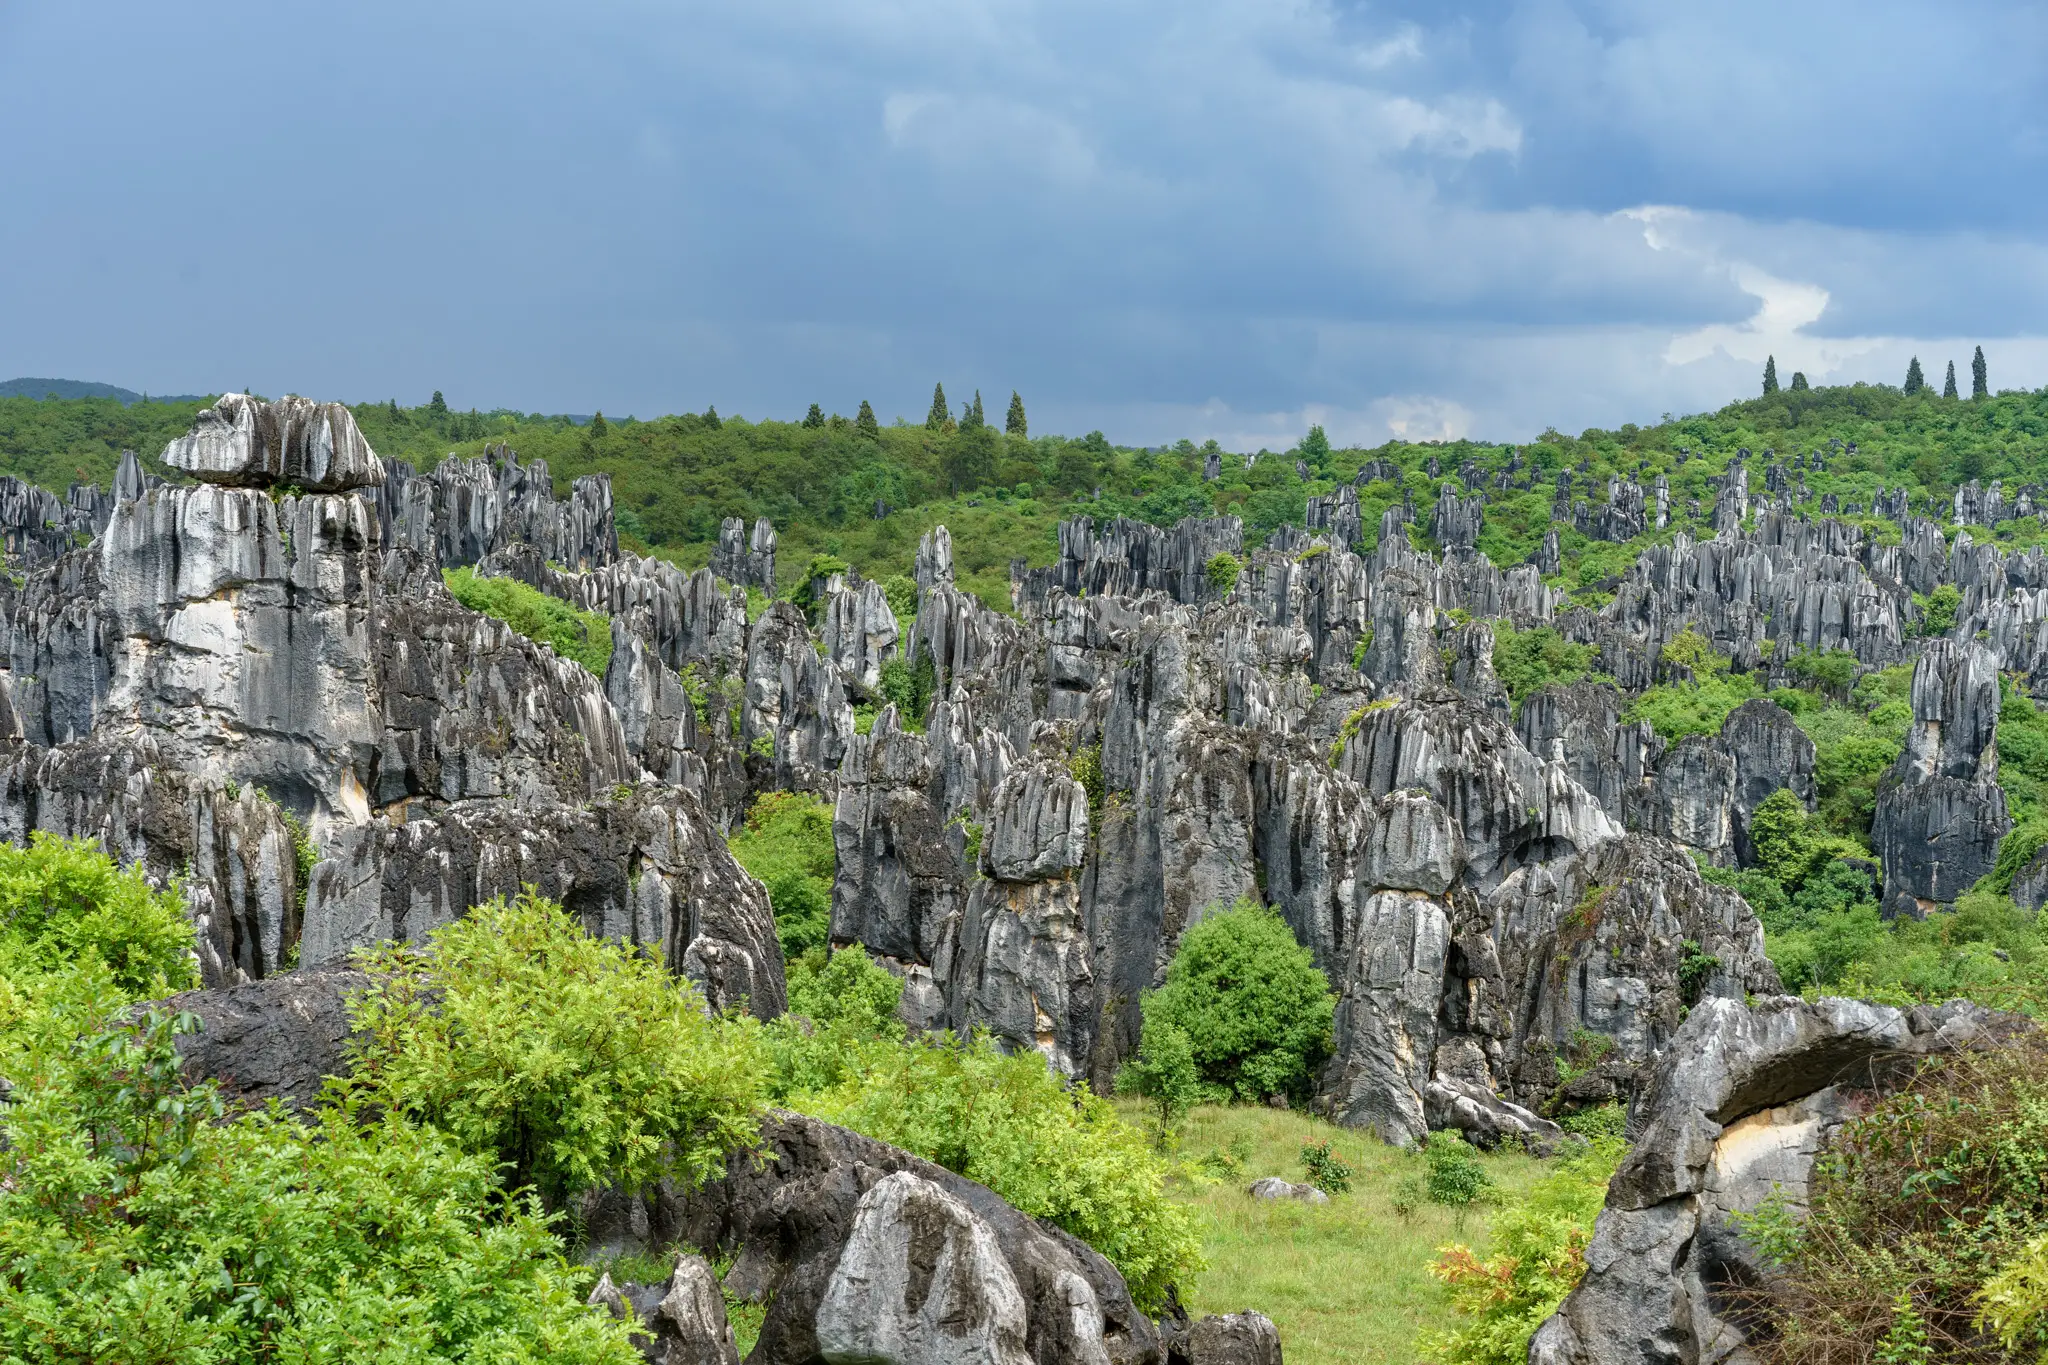 The Kunming Stone Forest, a great day trip from the city